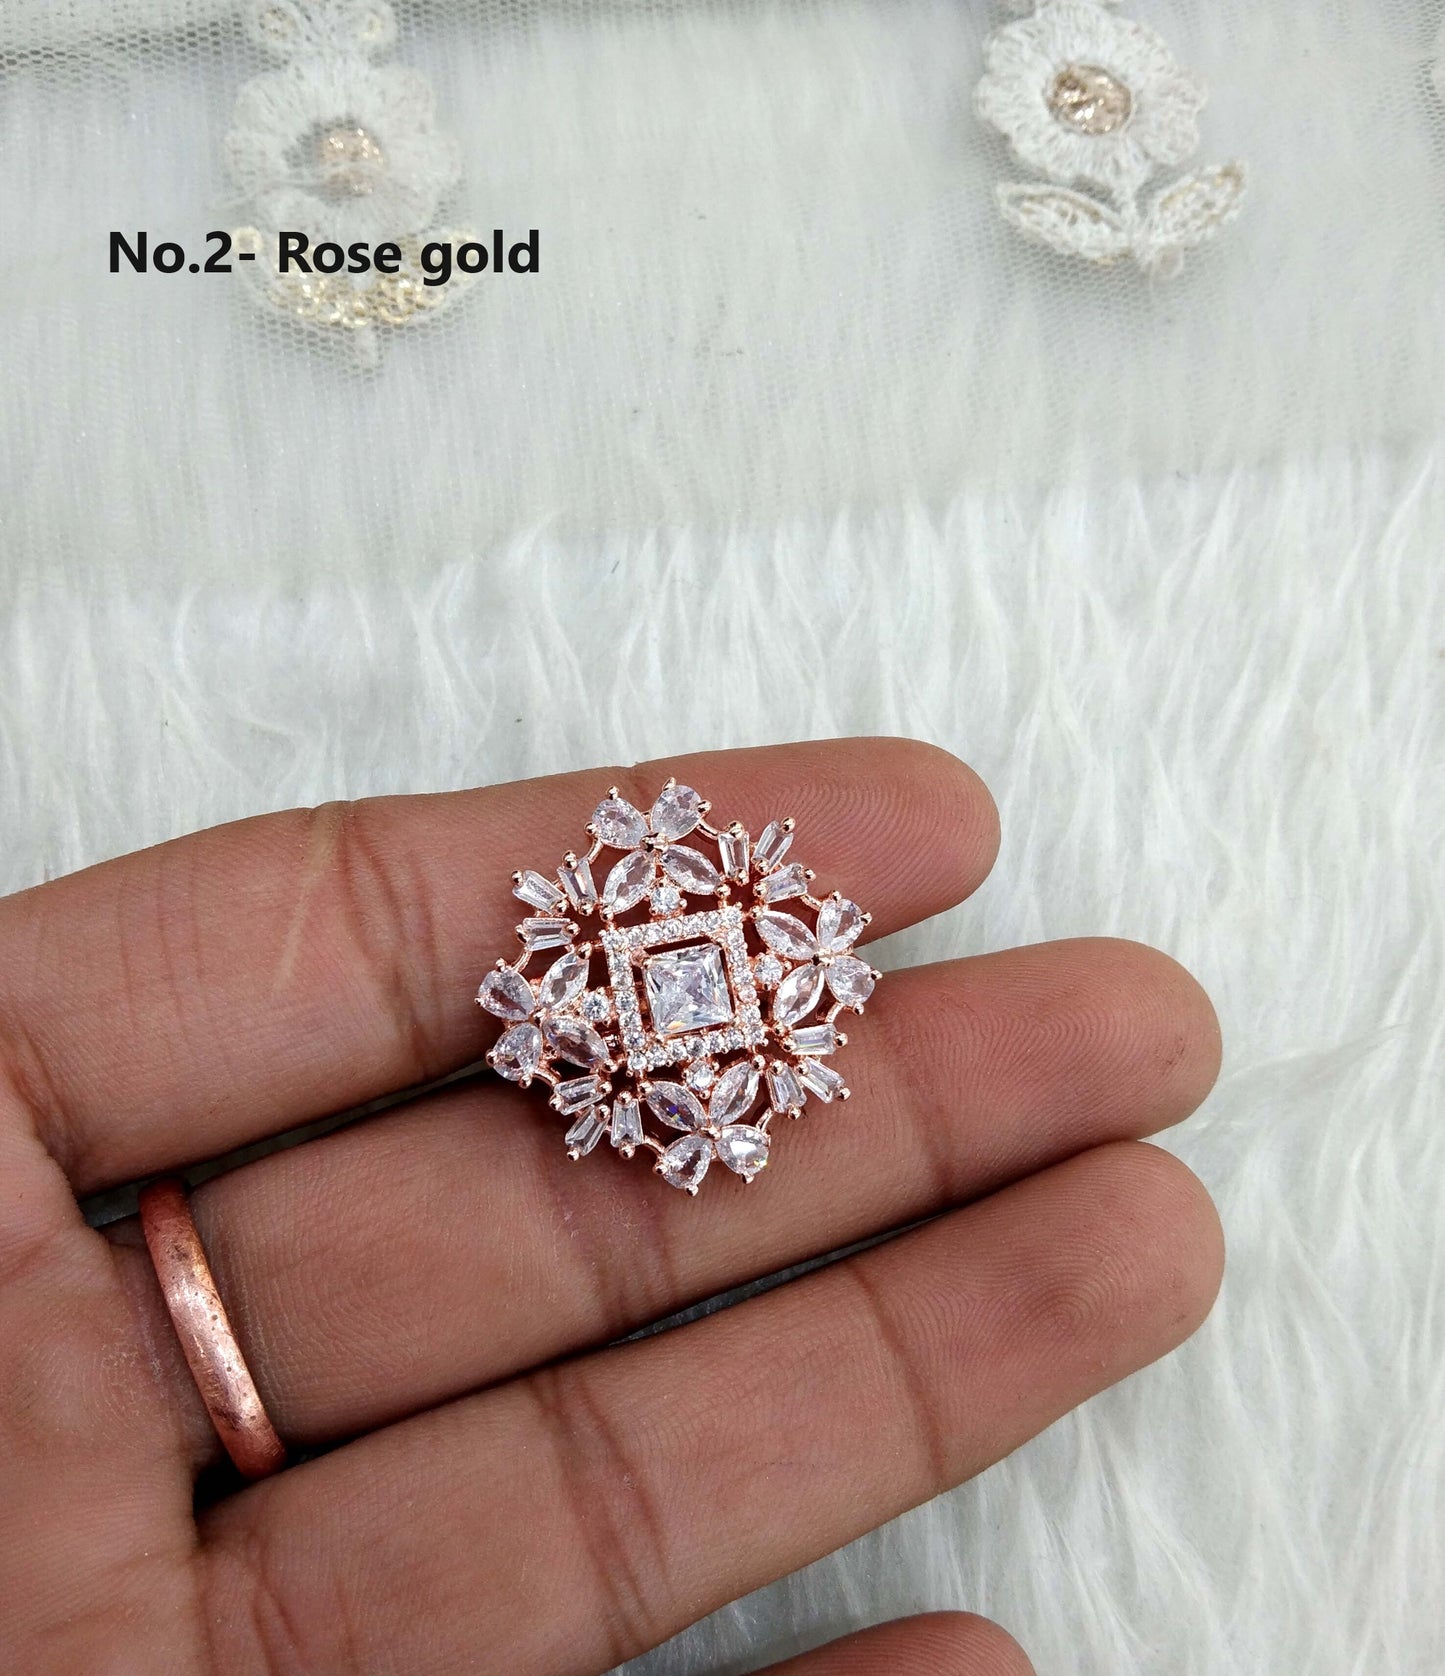 Indian Ring /Rose gold, silver finger rings Big round bridal rings hand accessory